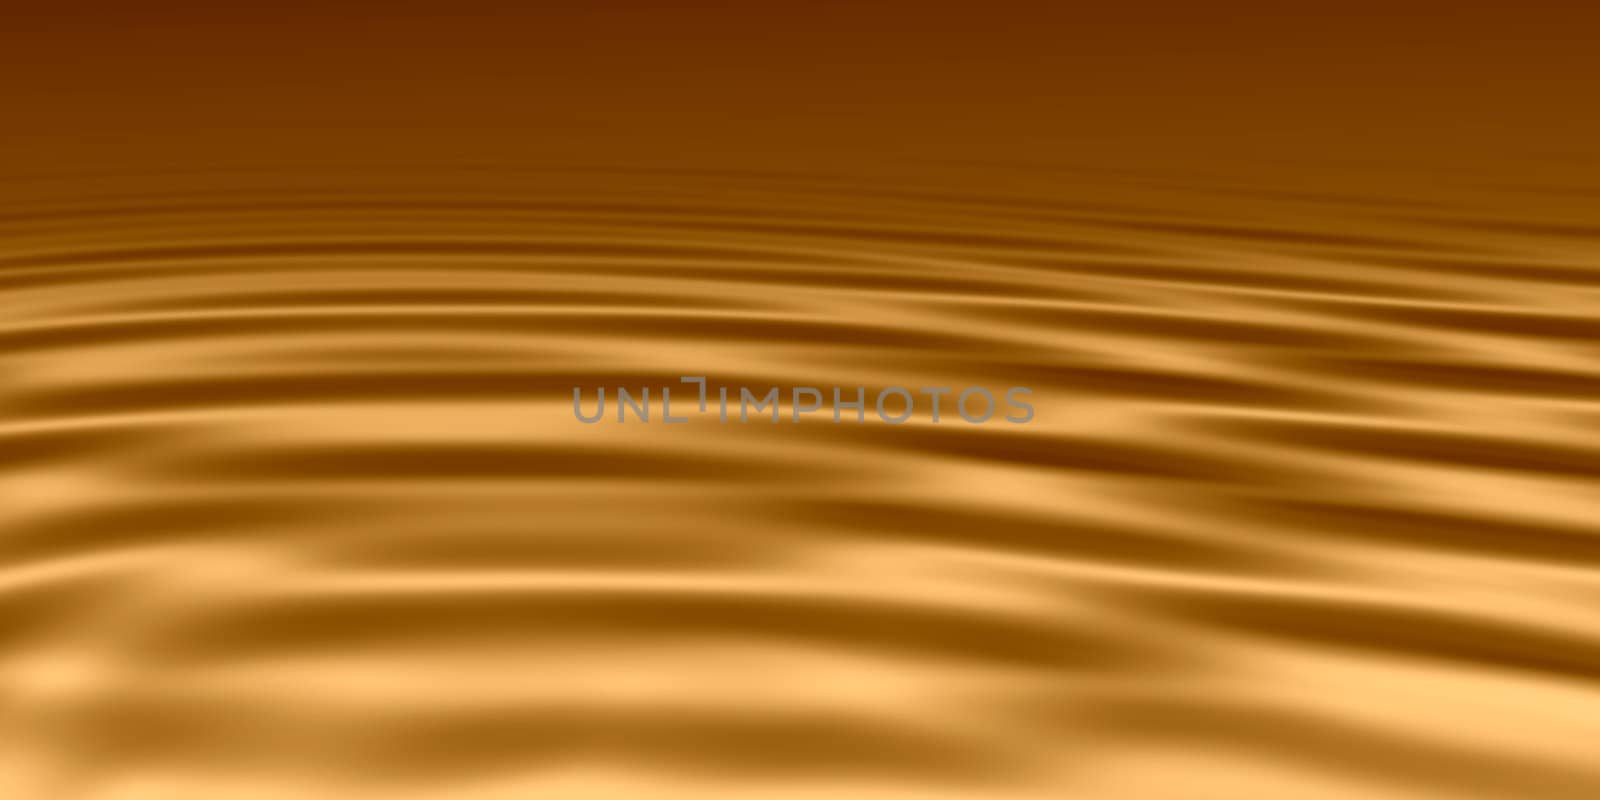 Abstract background with desert sand dunes texture